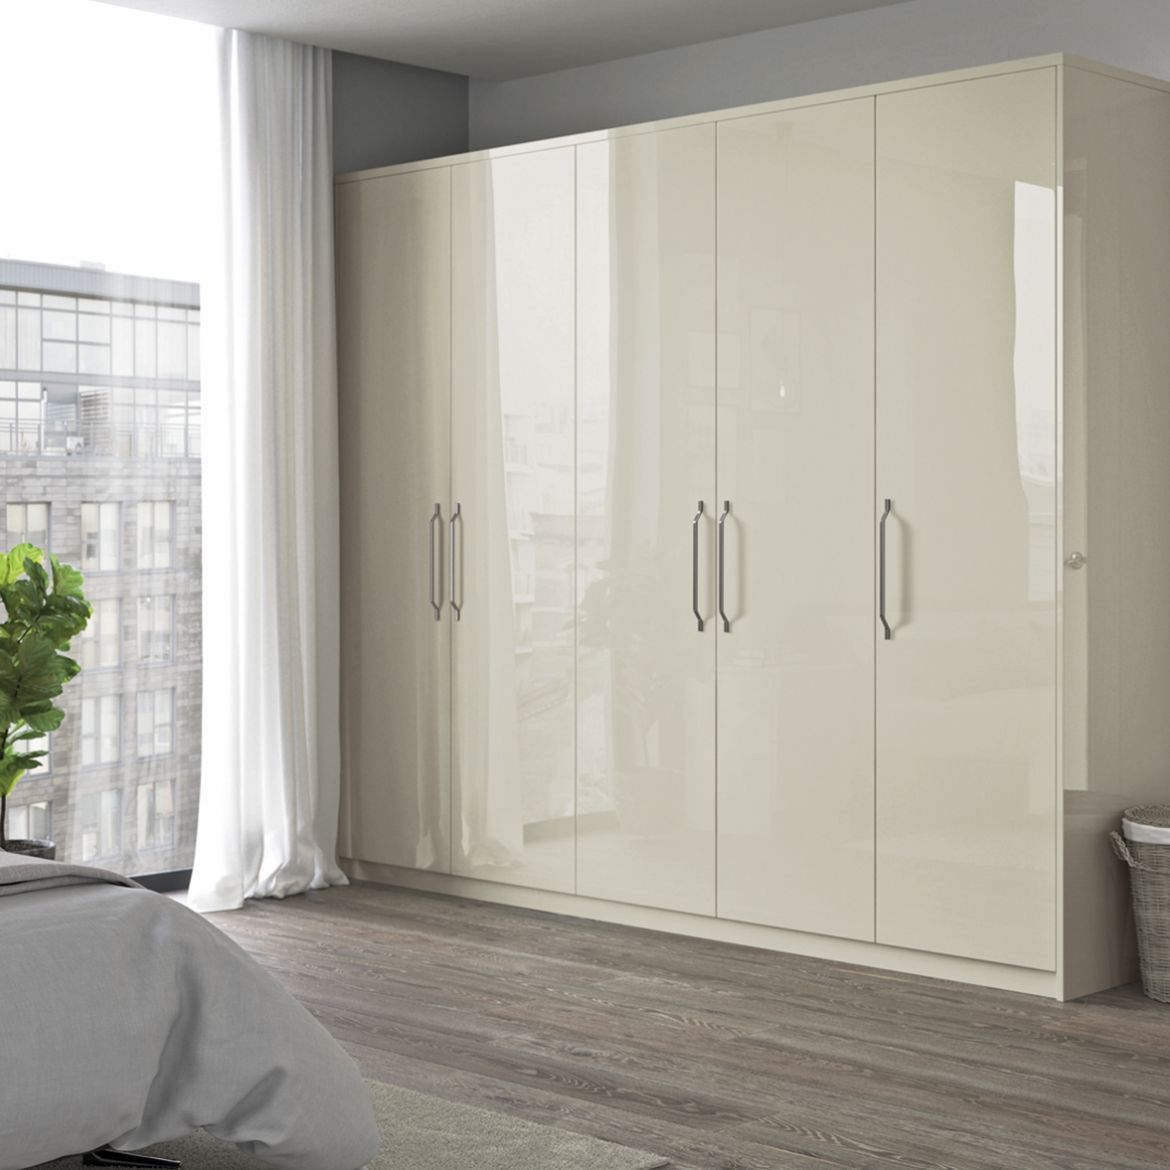 Reflections Wardrobe | Cash & Carry Kitchens Throughout White Gloss Wardrobes (View 13 of 15)